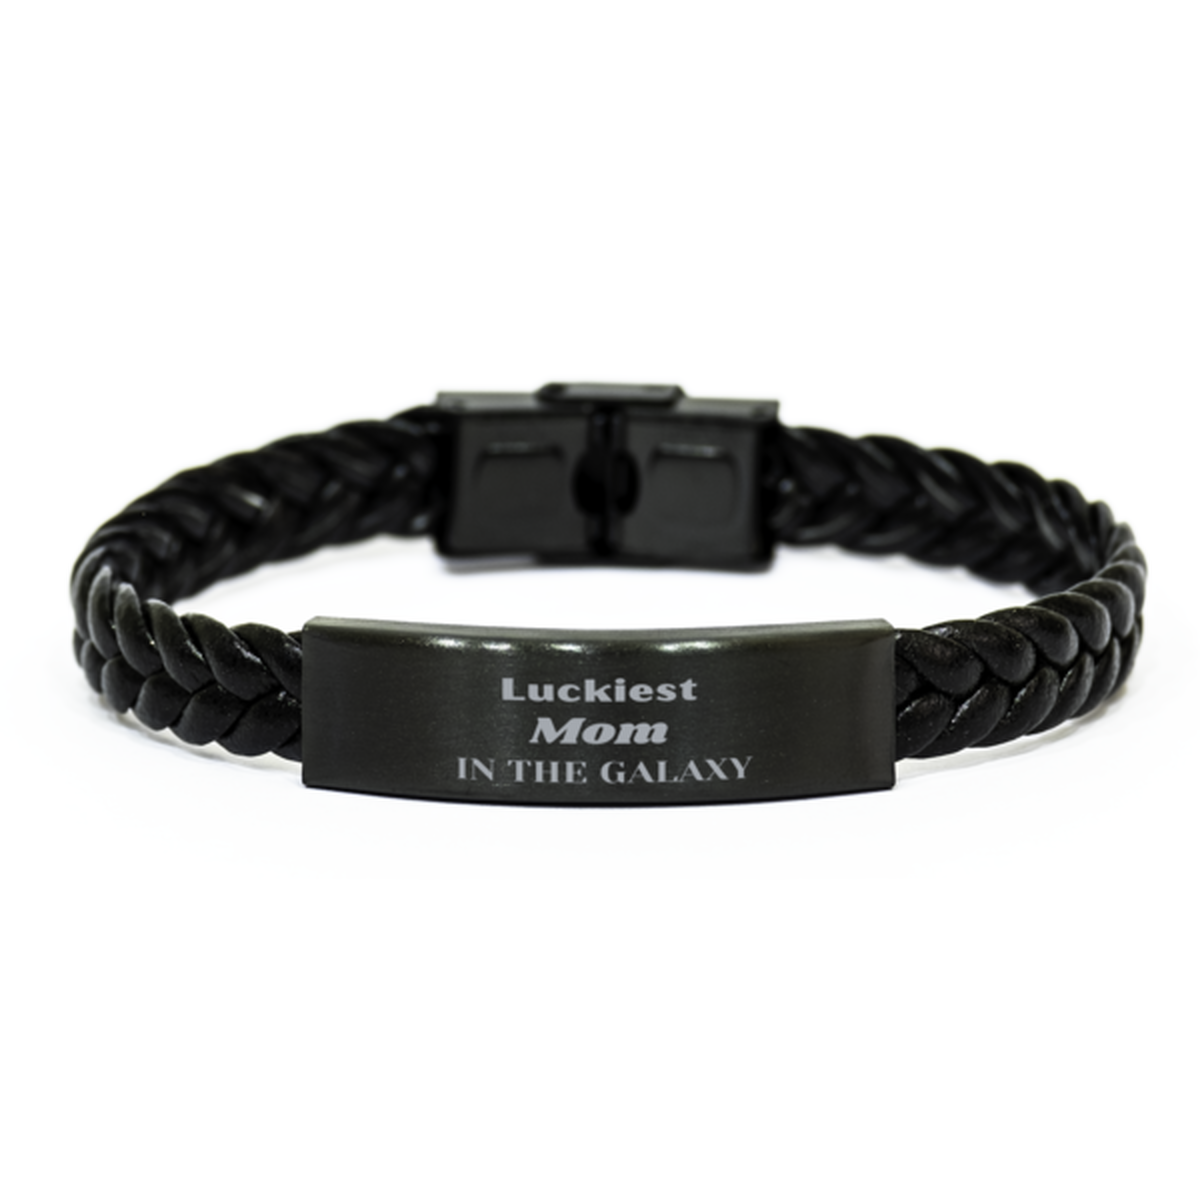 Luckiest Mom in the Galaxy, To My Mom Engraved Gifts, Christmas Mom Braided Leather Bracelet Gifts, X-mas Birthday Unique Gifts For Mom Men Women